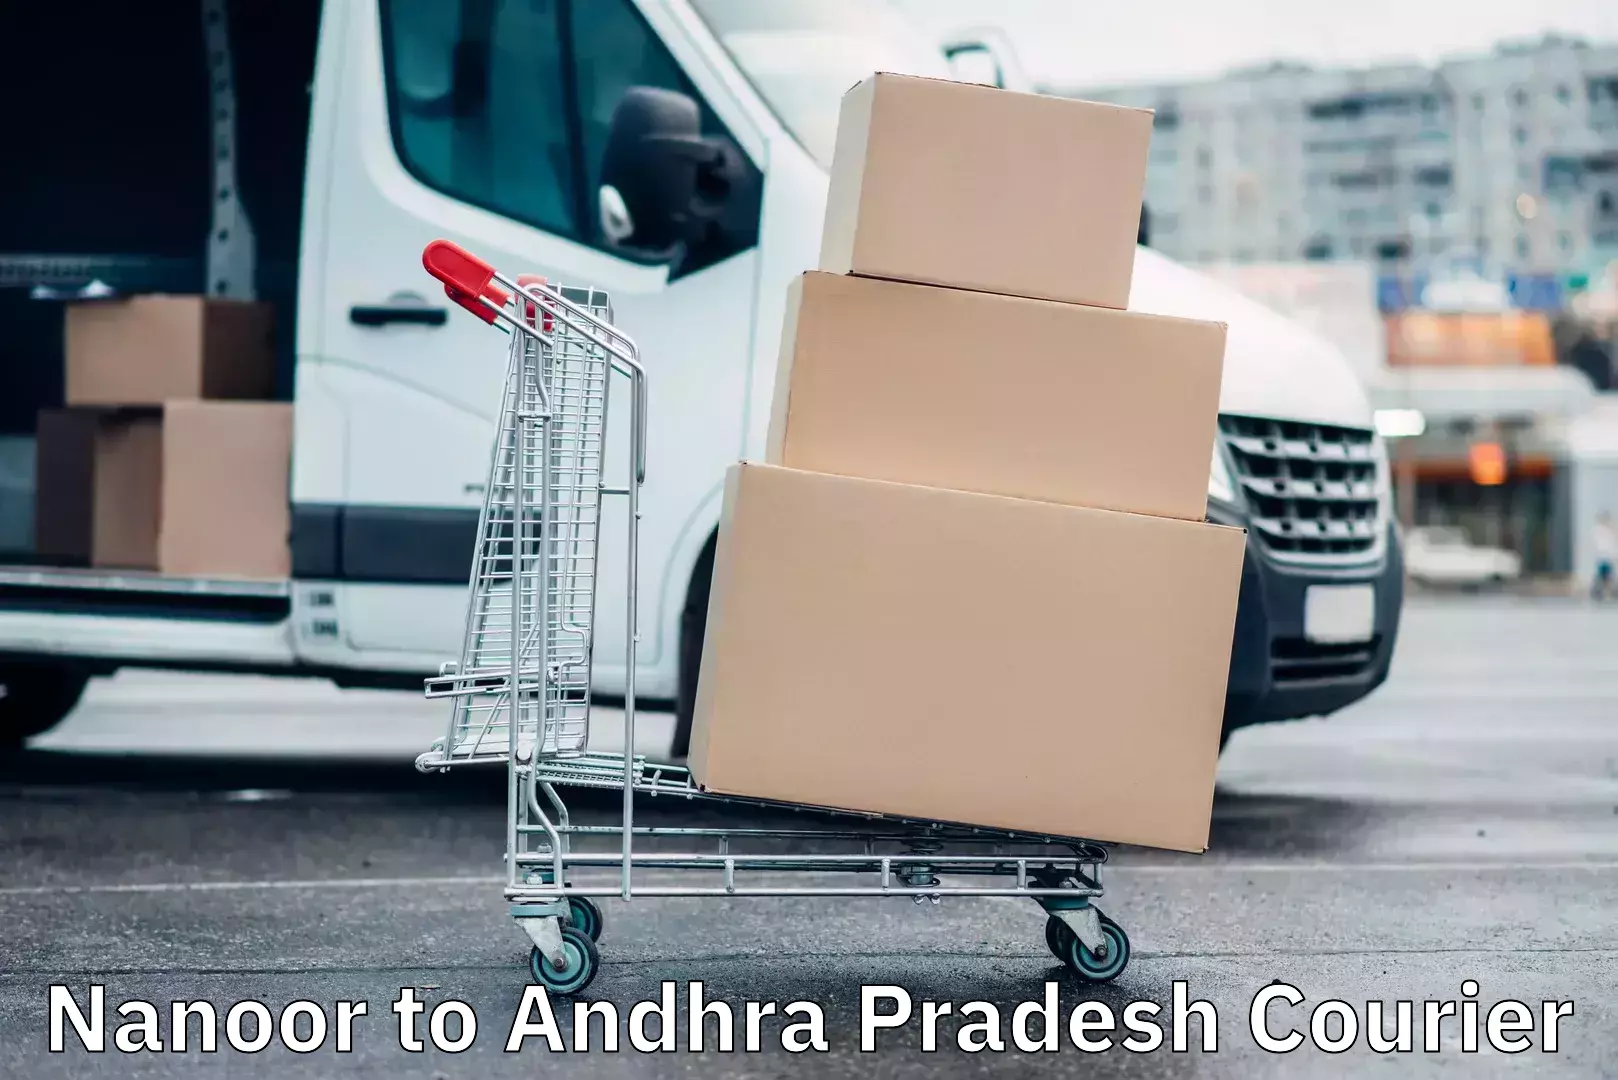 Residential courier service Nanoor to Visakhapatnam Port